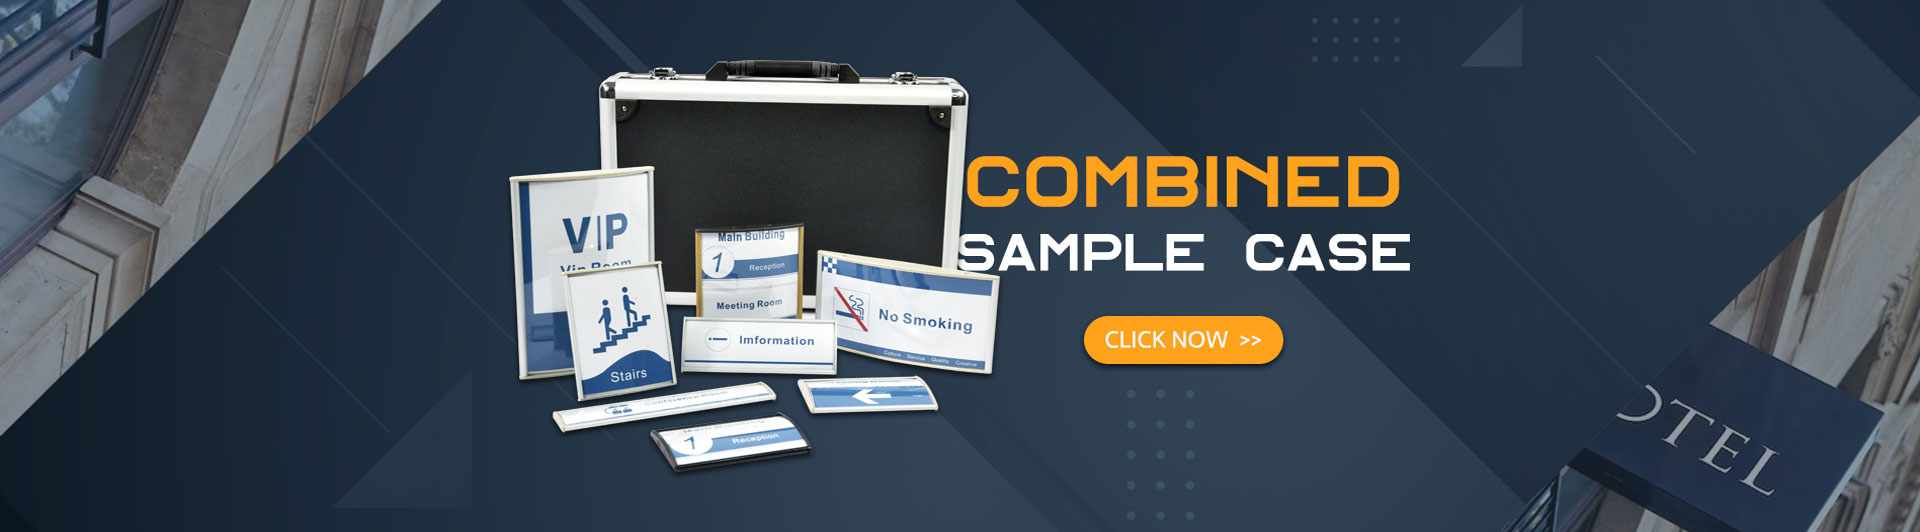 COMBINED SAMPLE CASE